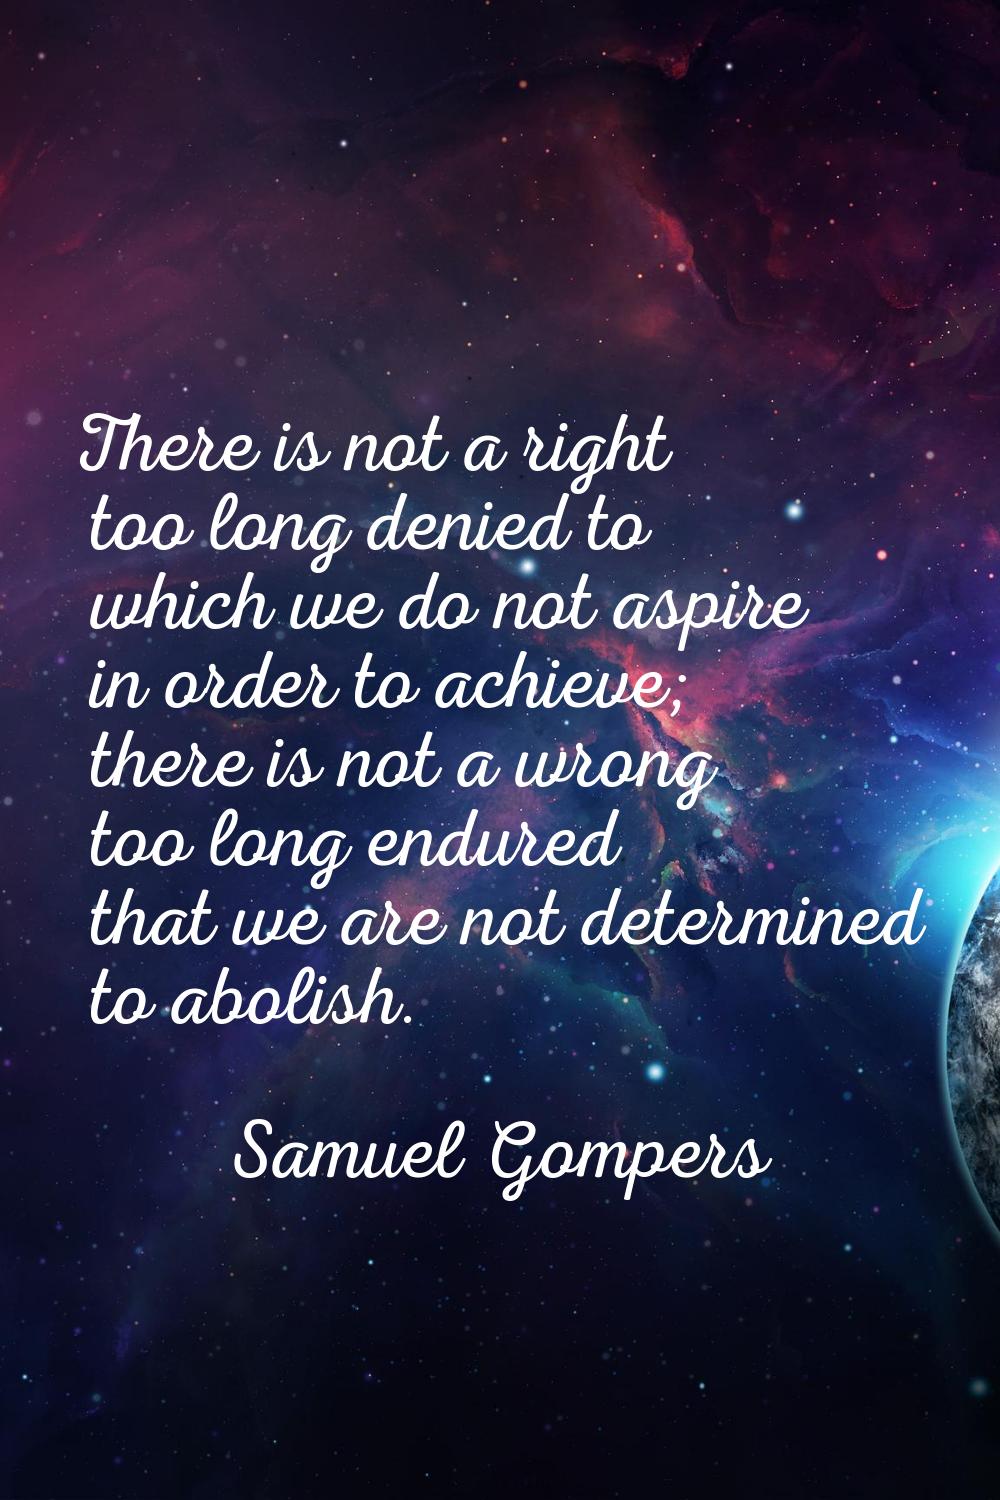 There is not a right too long denied to which we do not aspire in order to achieve; there is not a 